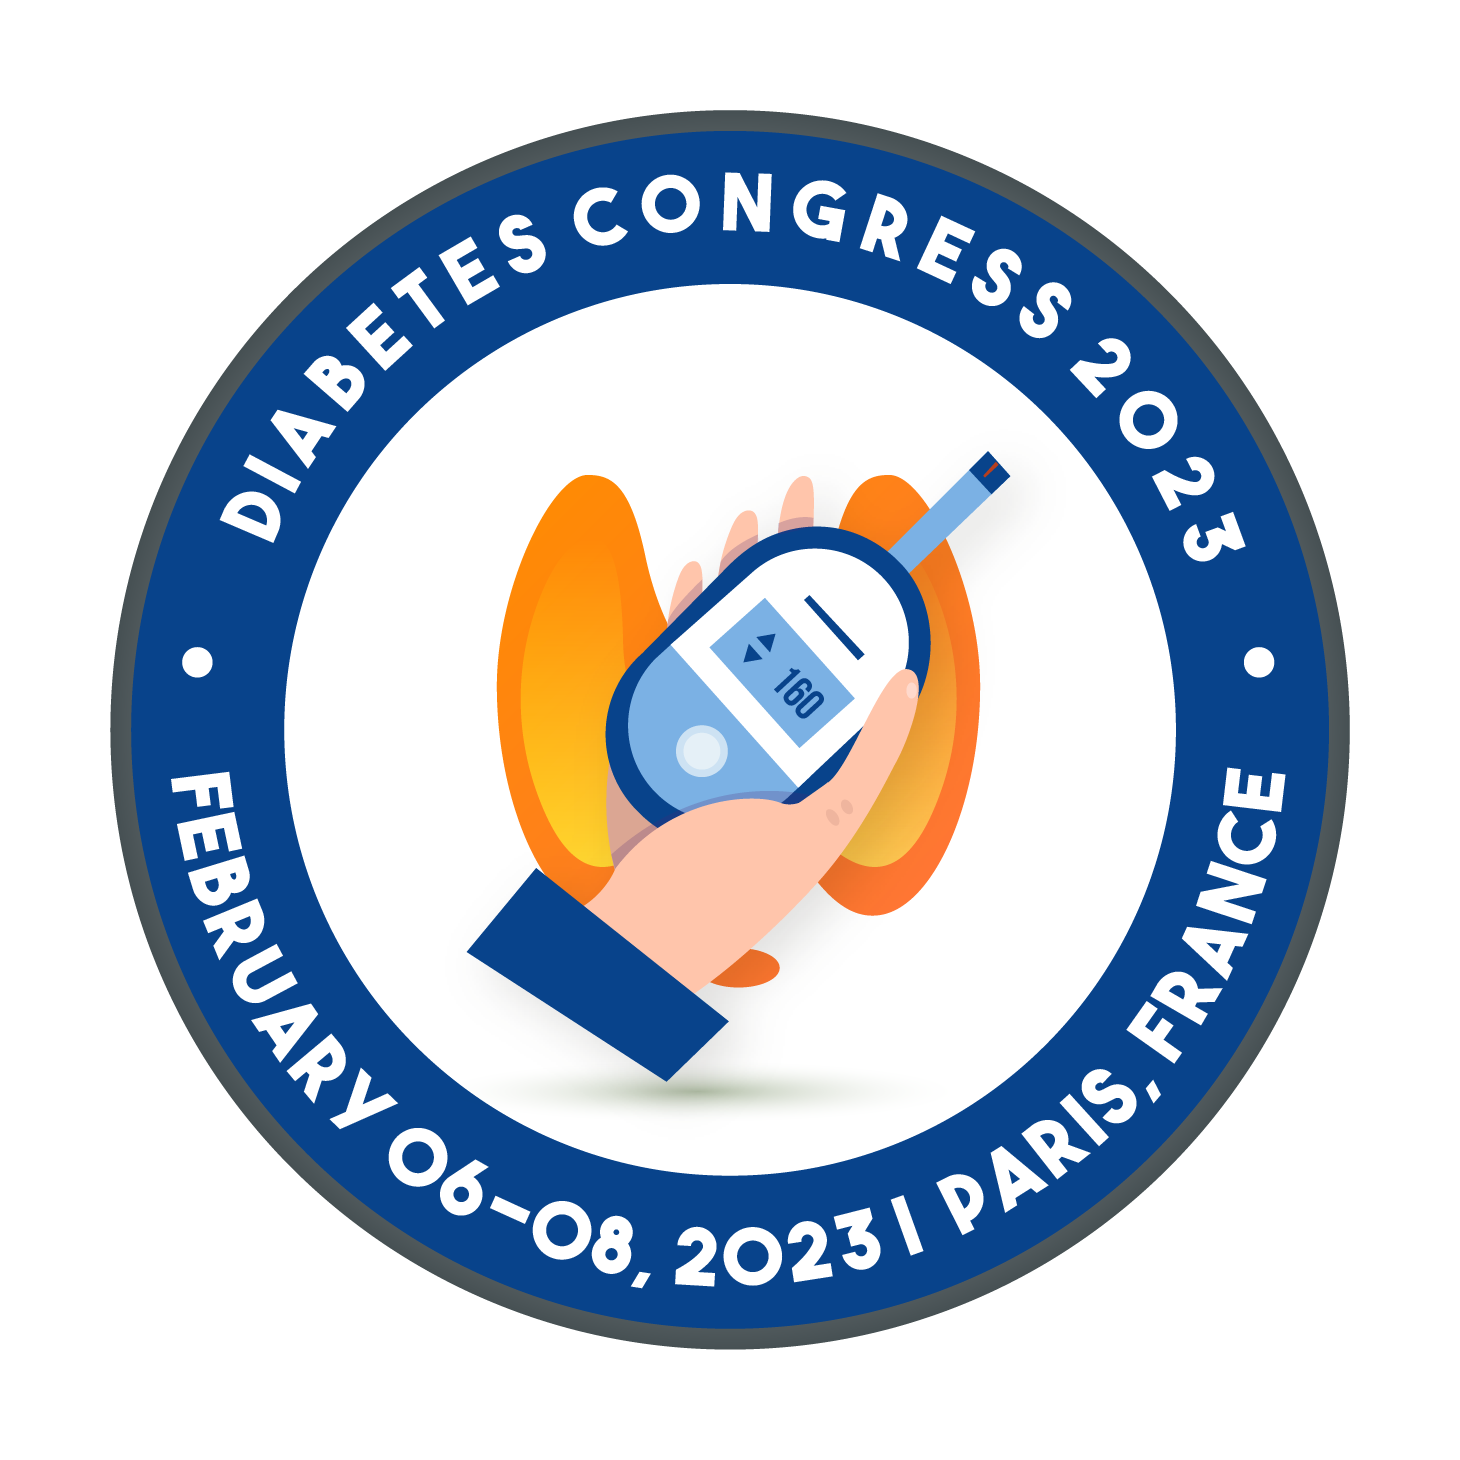 31st International Conference on Diabetes and Endocrinology